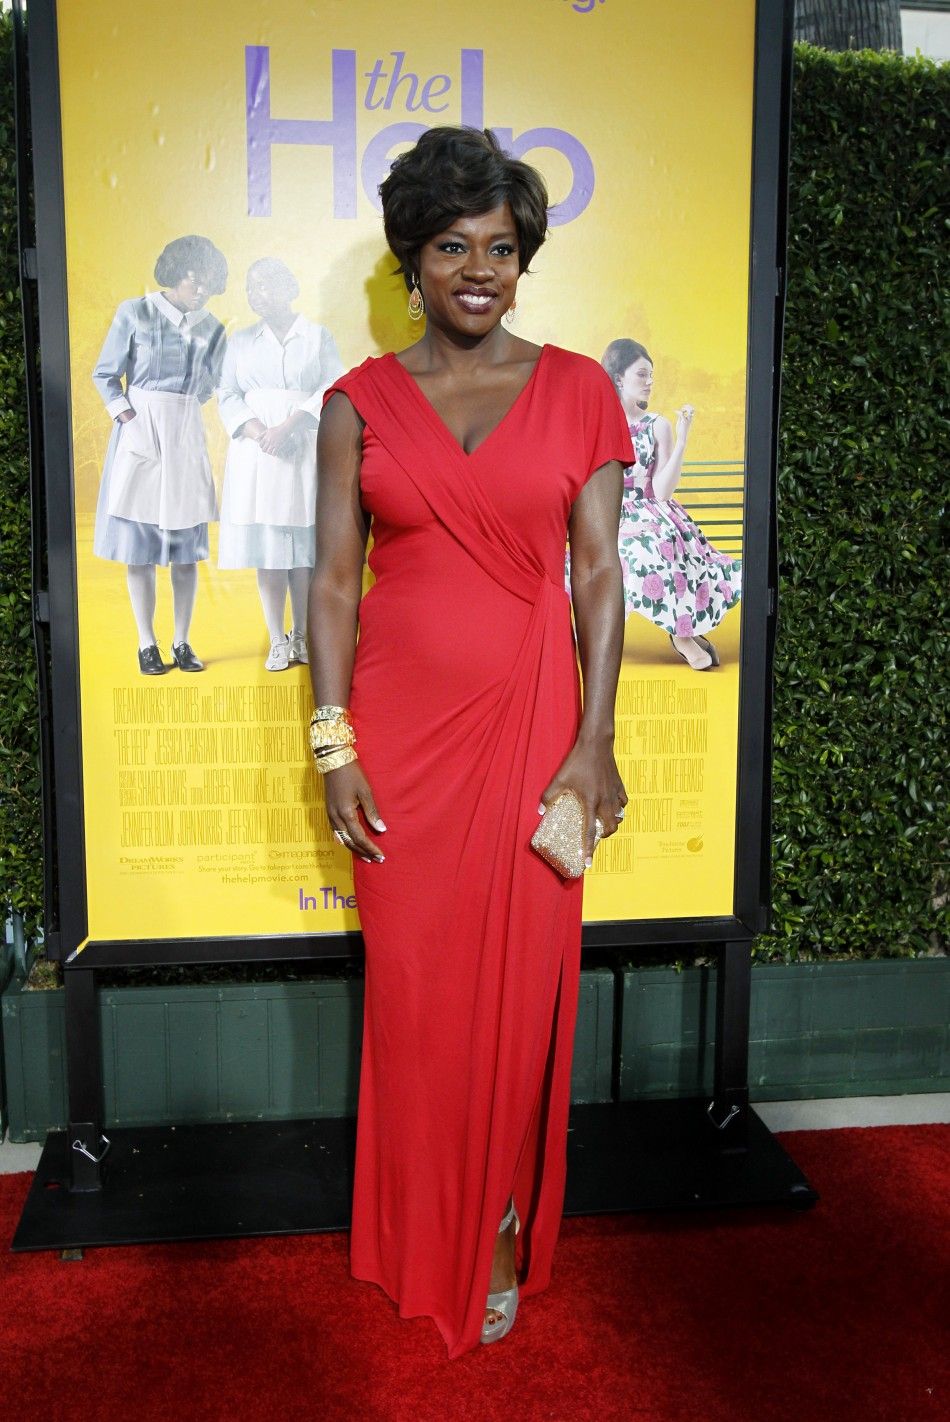 Cast member Viola Davis poses at the premiere of the movie quotThe Helpquot at the Samuel Goldwyn Theatre in Beverly Hills, California 